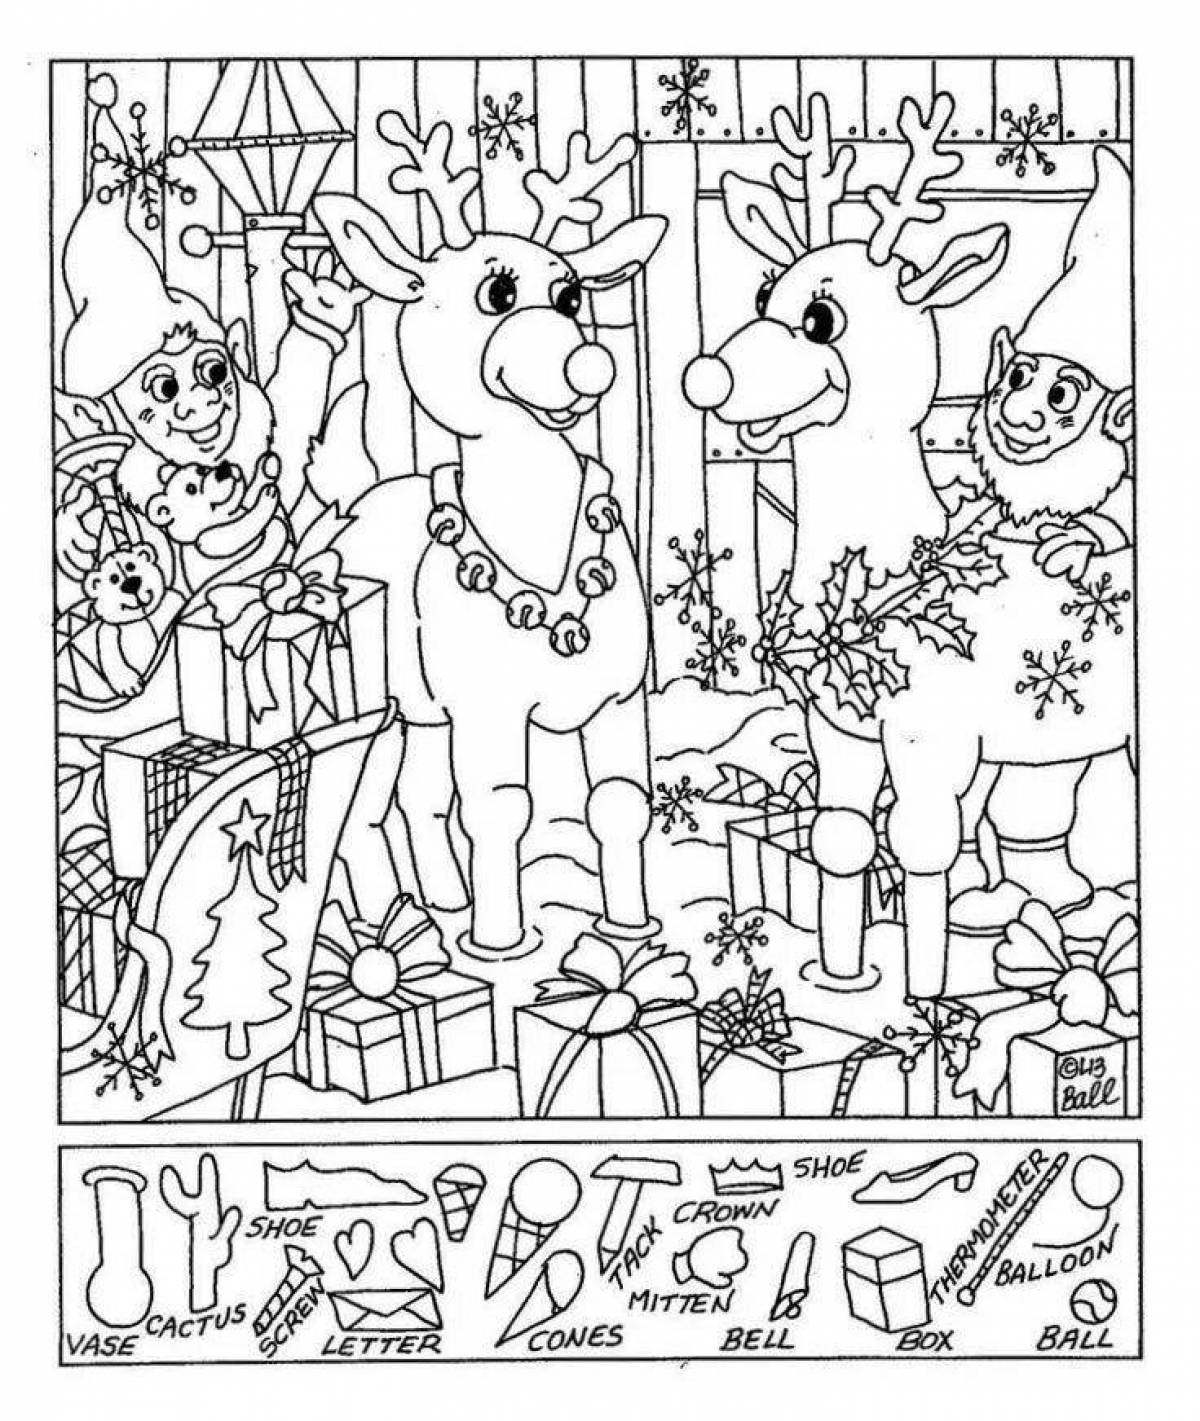 Fun object search on coloring page